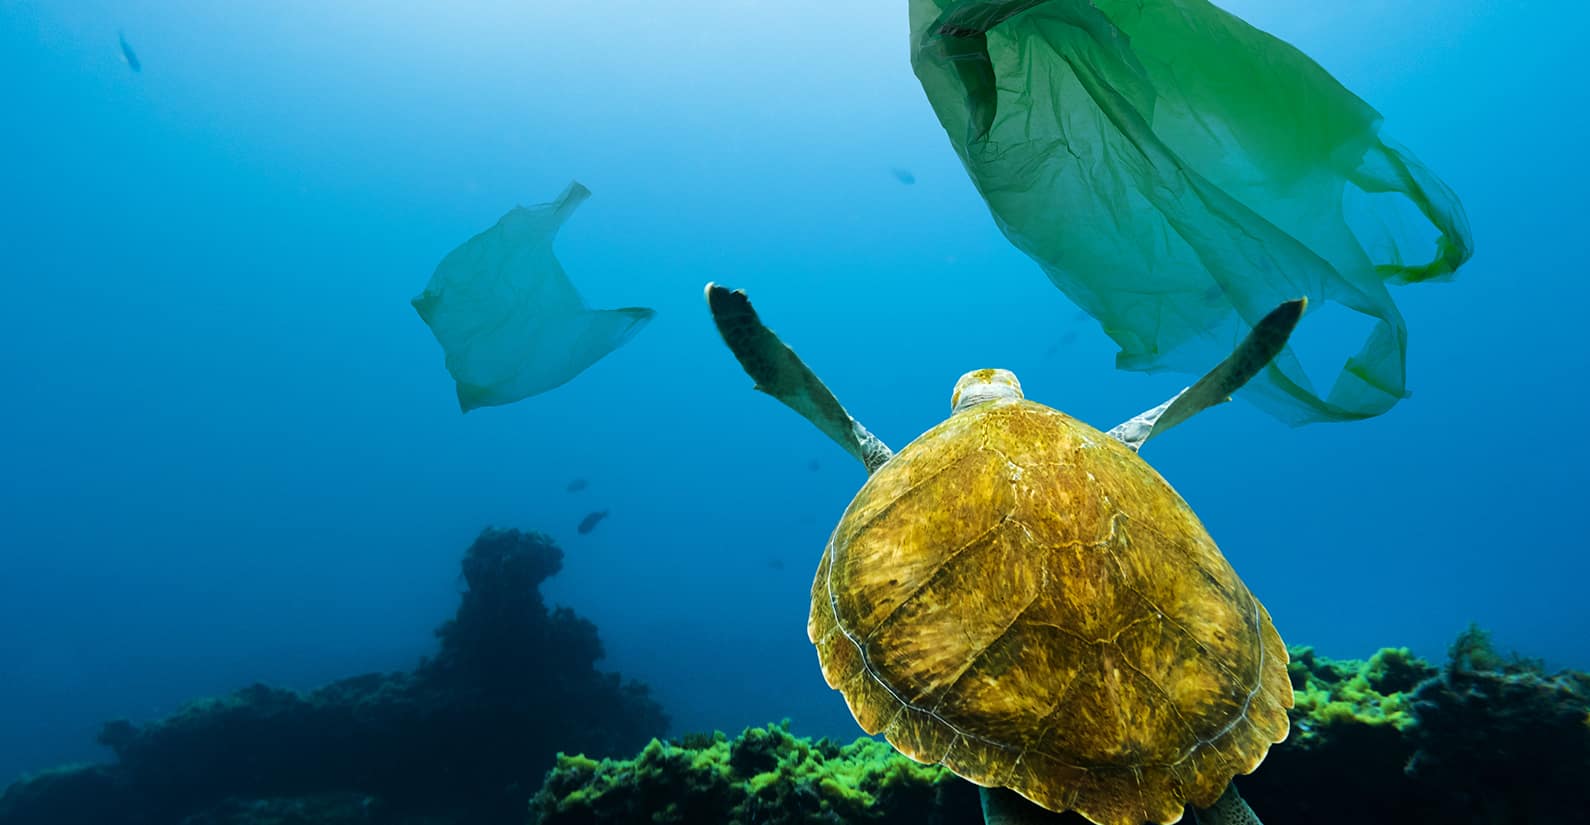 A turtle's close encounter with plastic waste